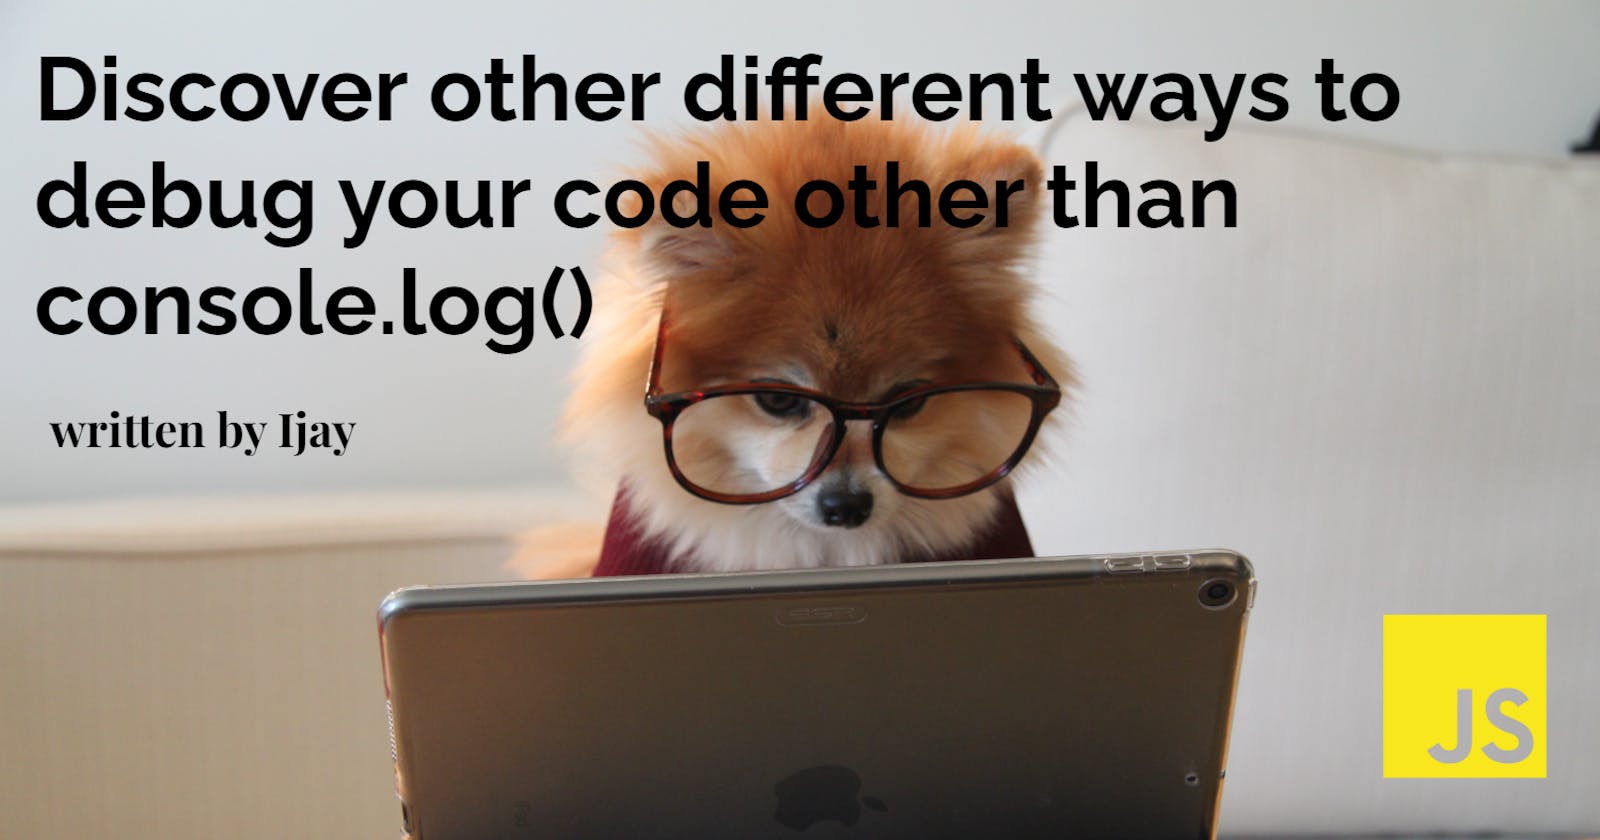 Discover other different ways to debug your code other than console.log()